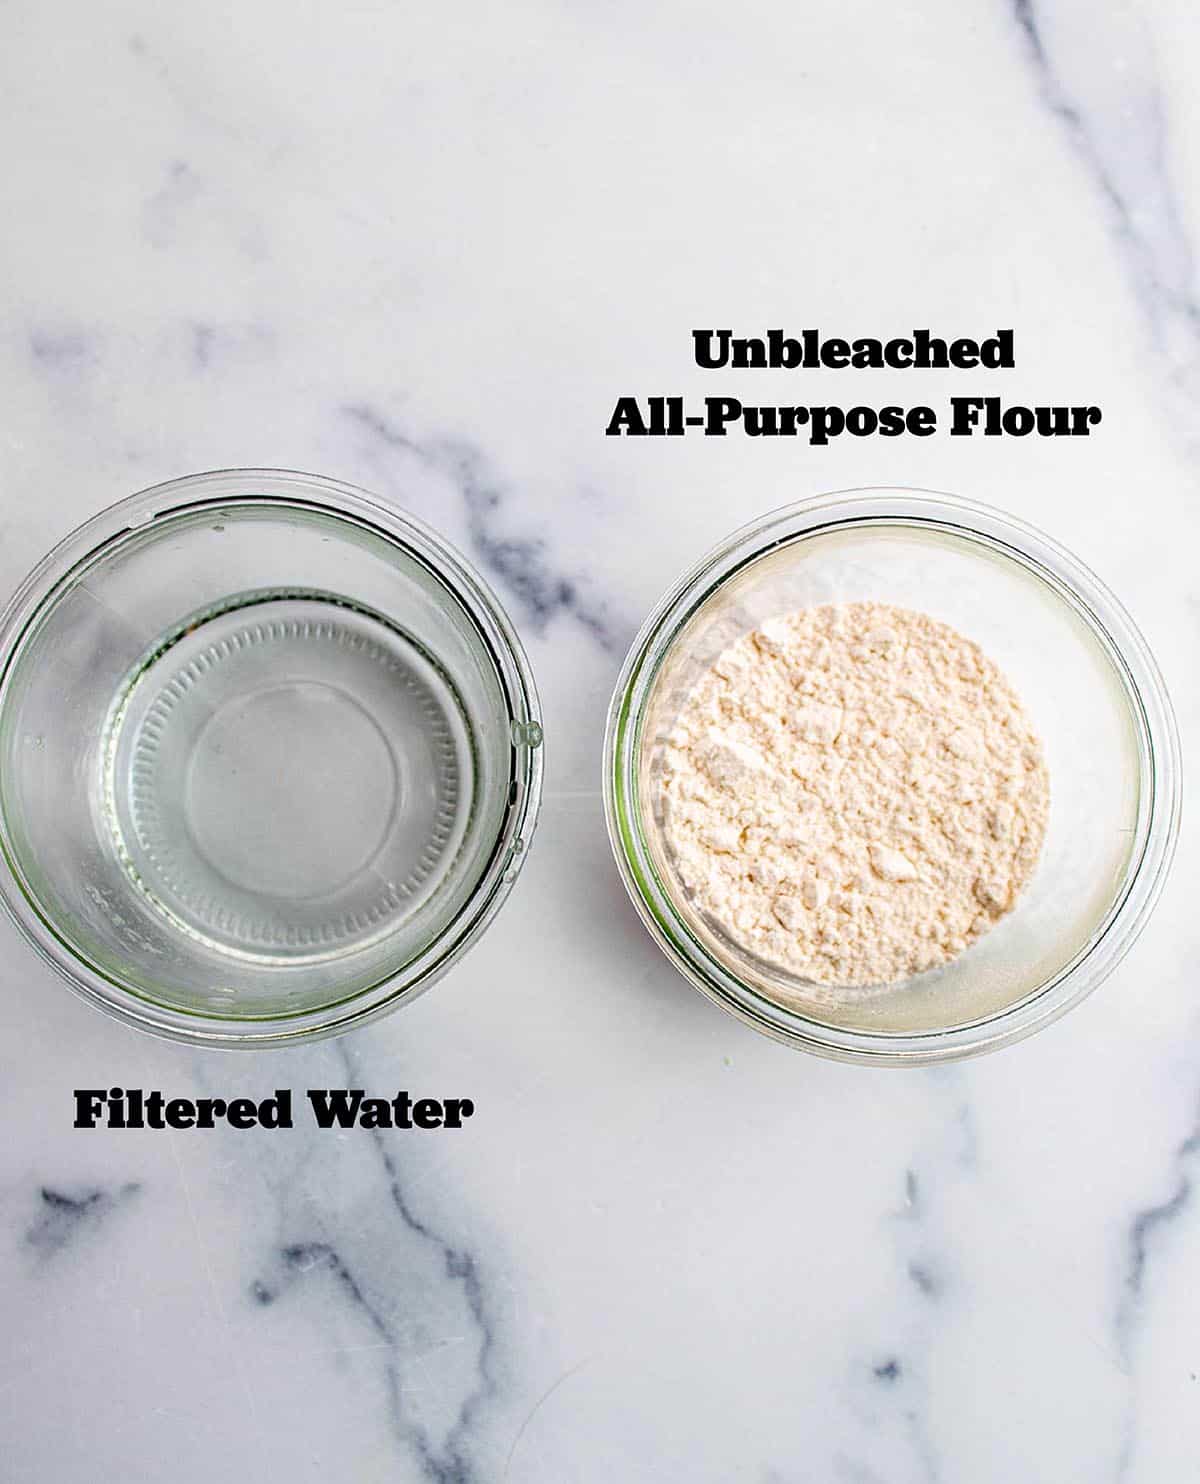 Two glass jars, one with all-purpose flour and the other with filtered water.